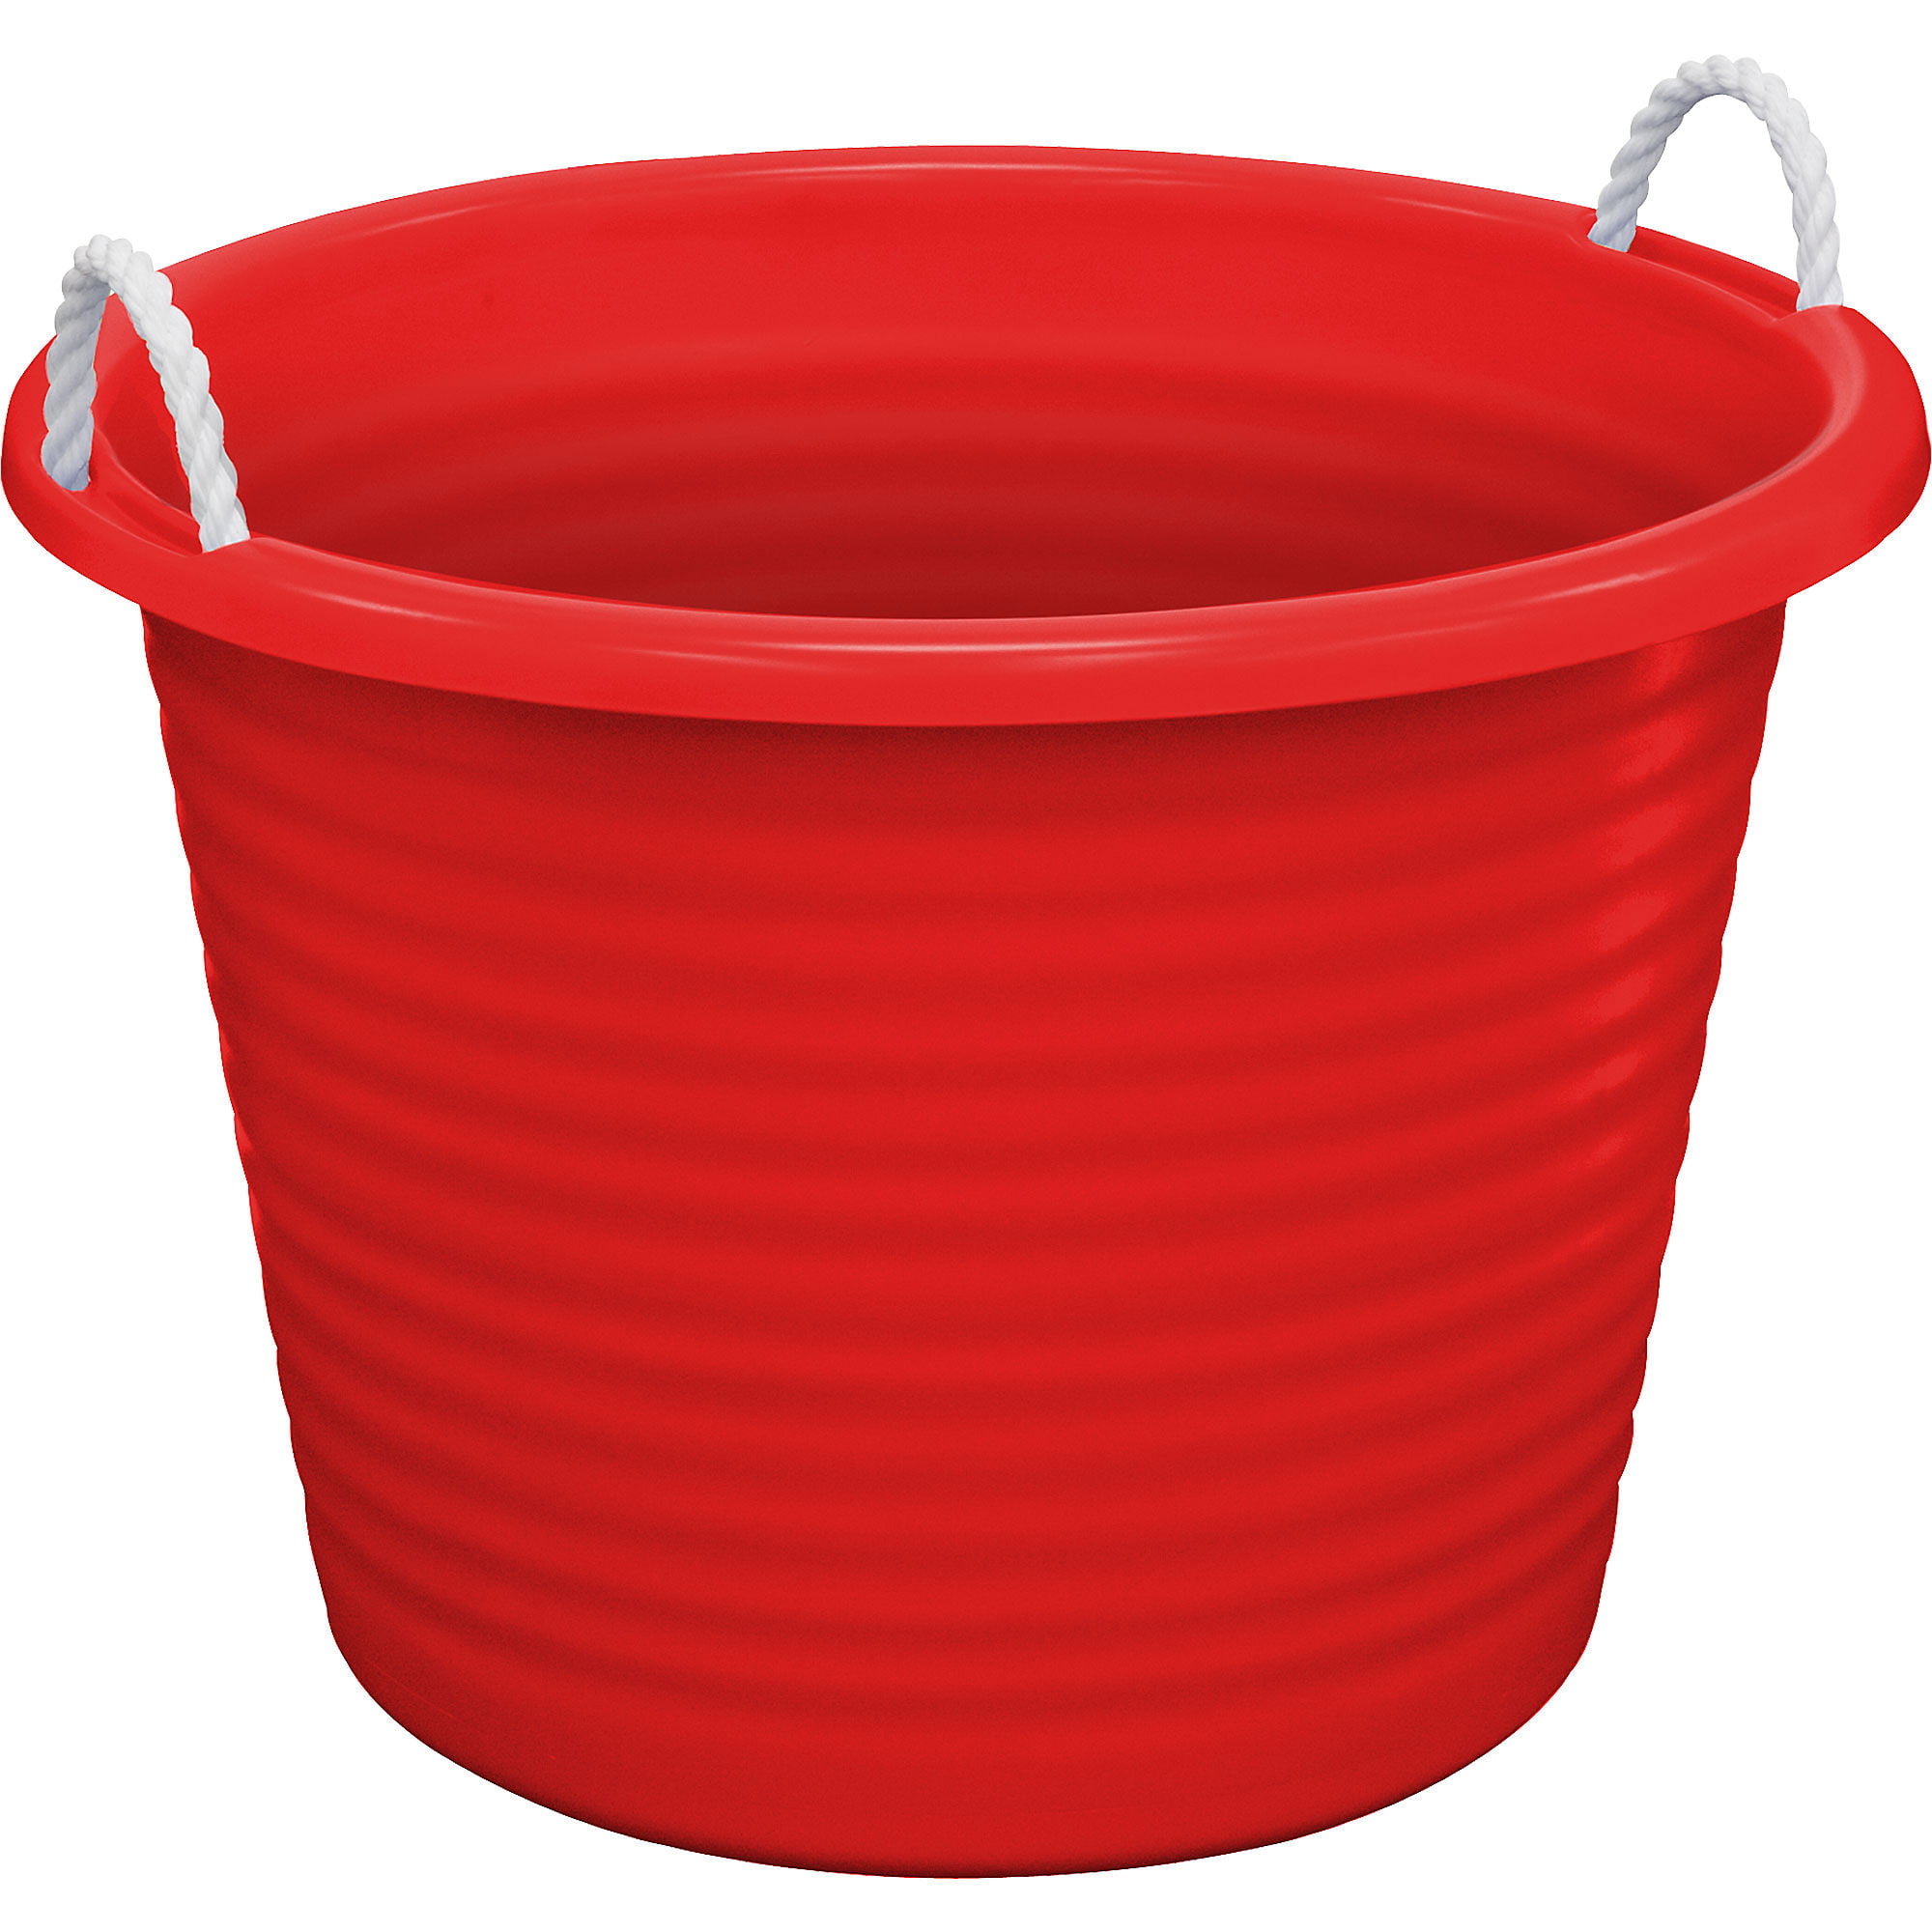 Red Plastic Tub, Perfect for Ice and Drinks, 17-Gallon Capacity